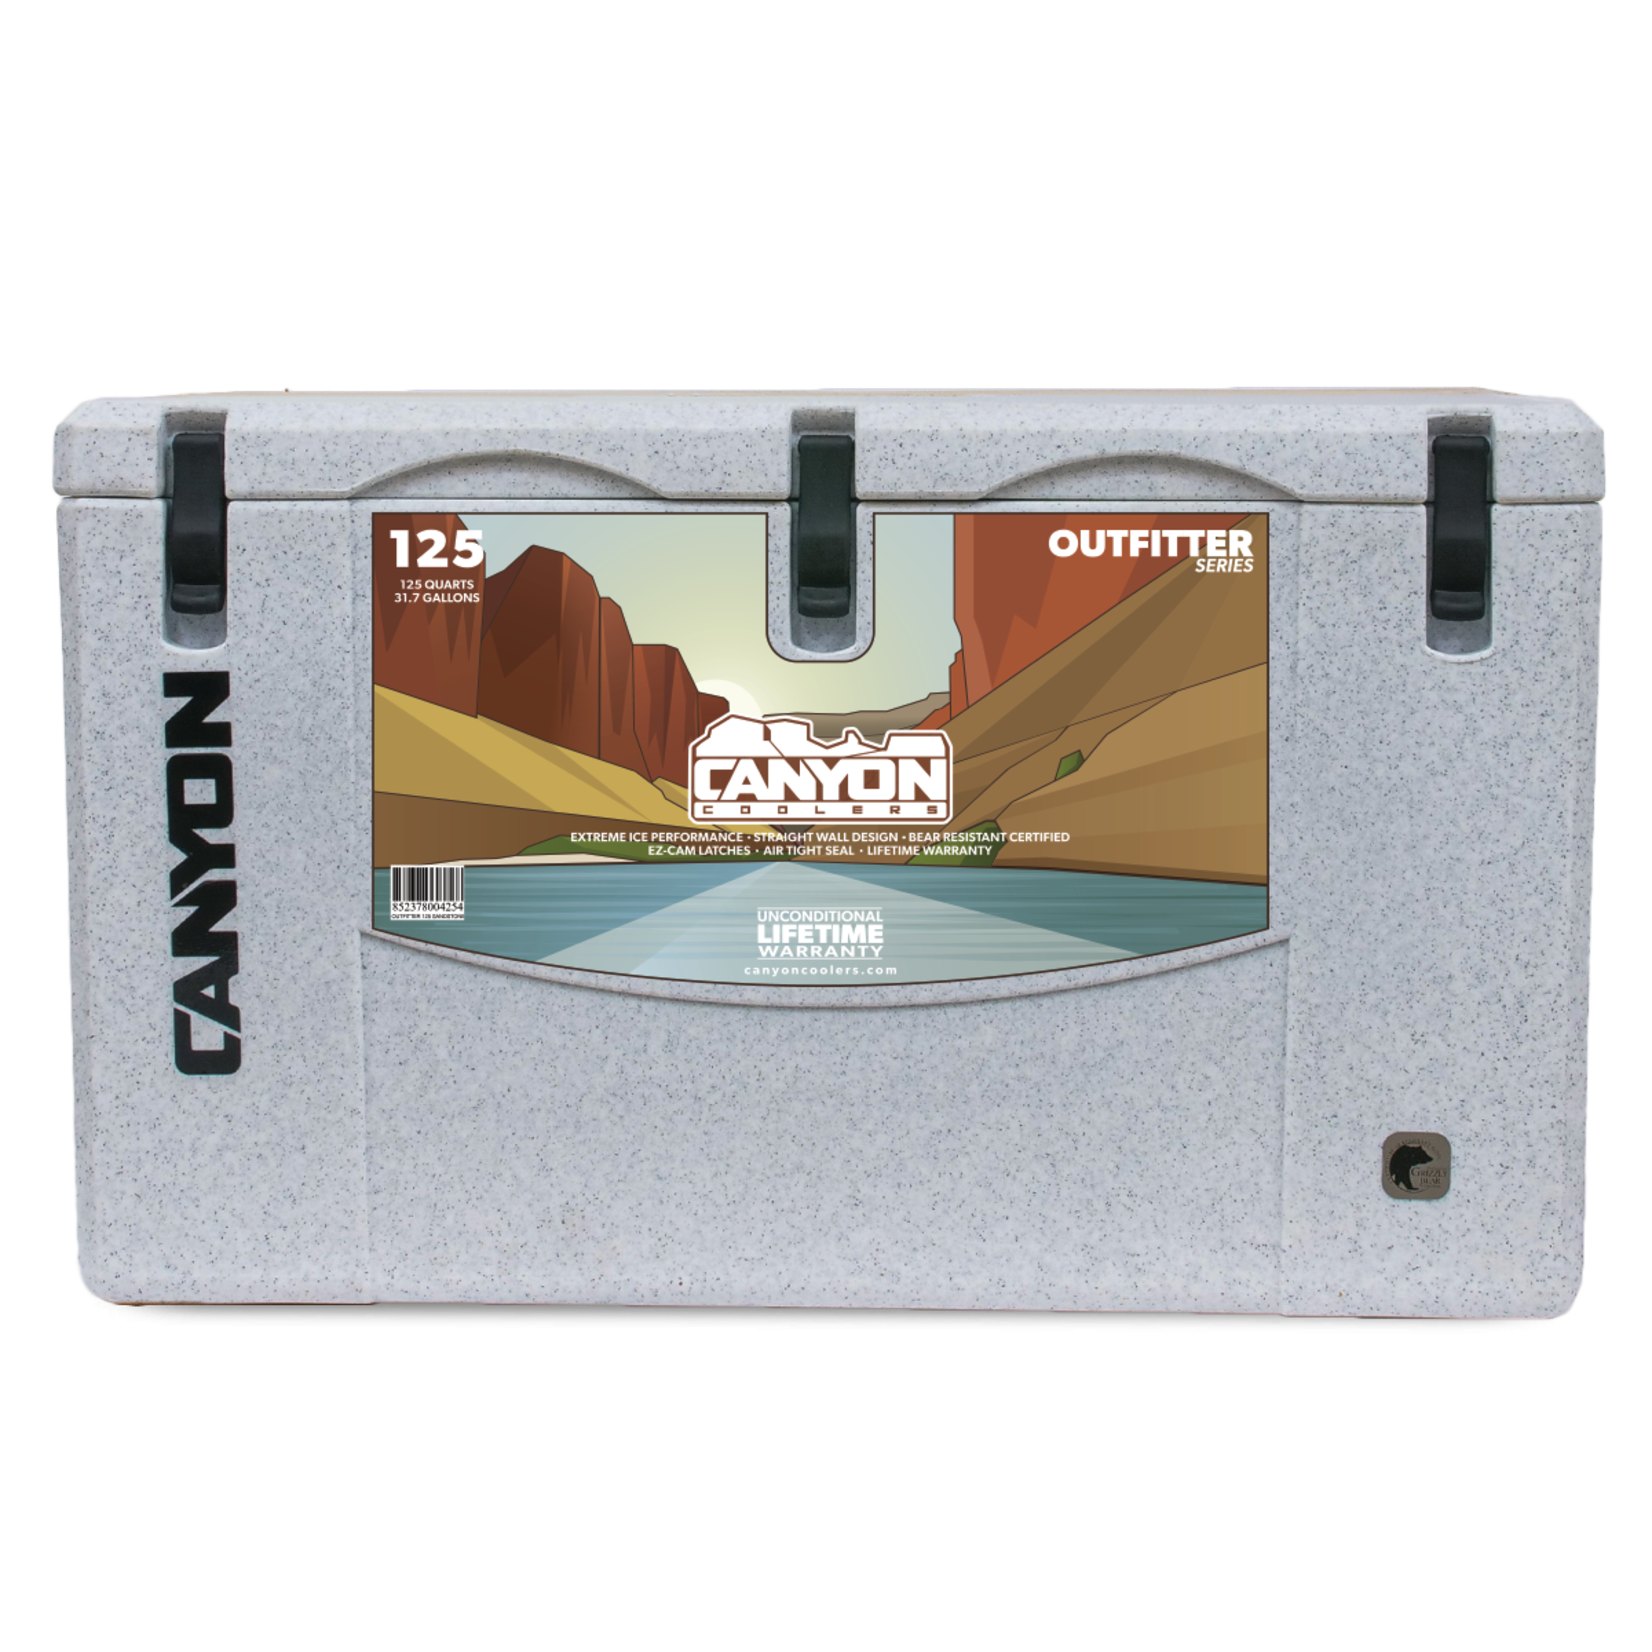 Canyon Coolers Canyon Coolers Outfitter 125